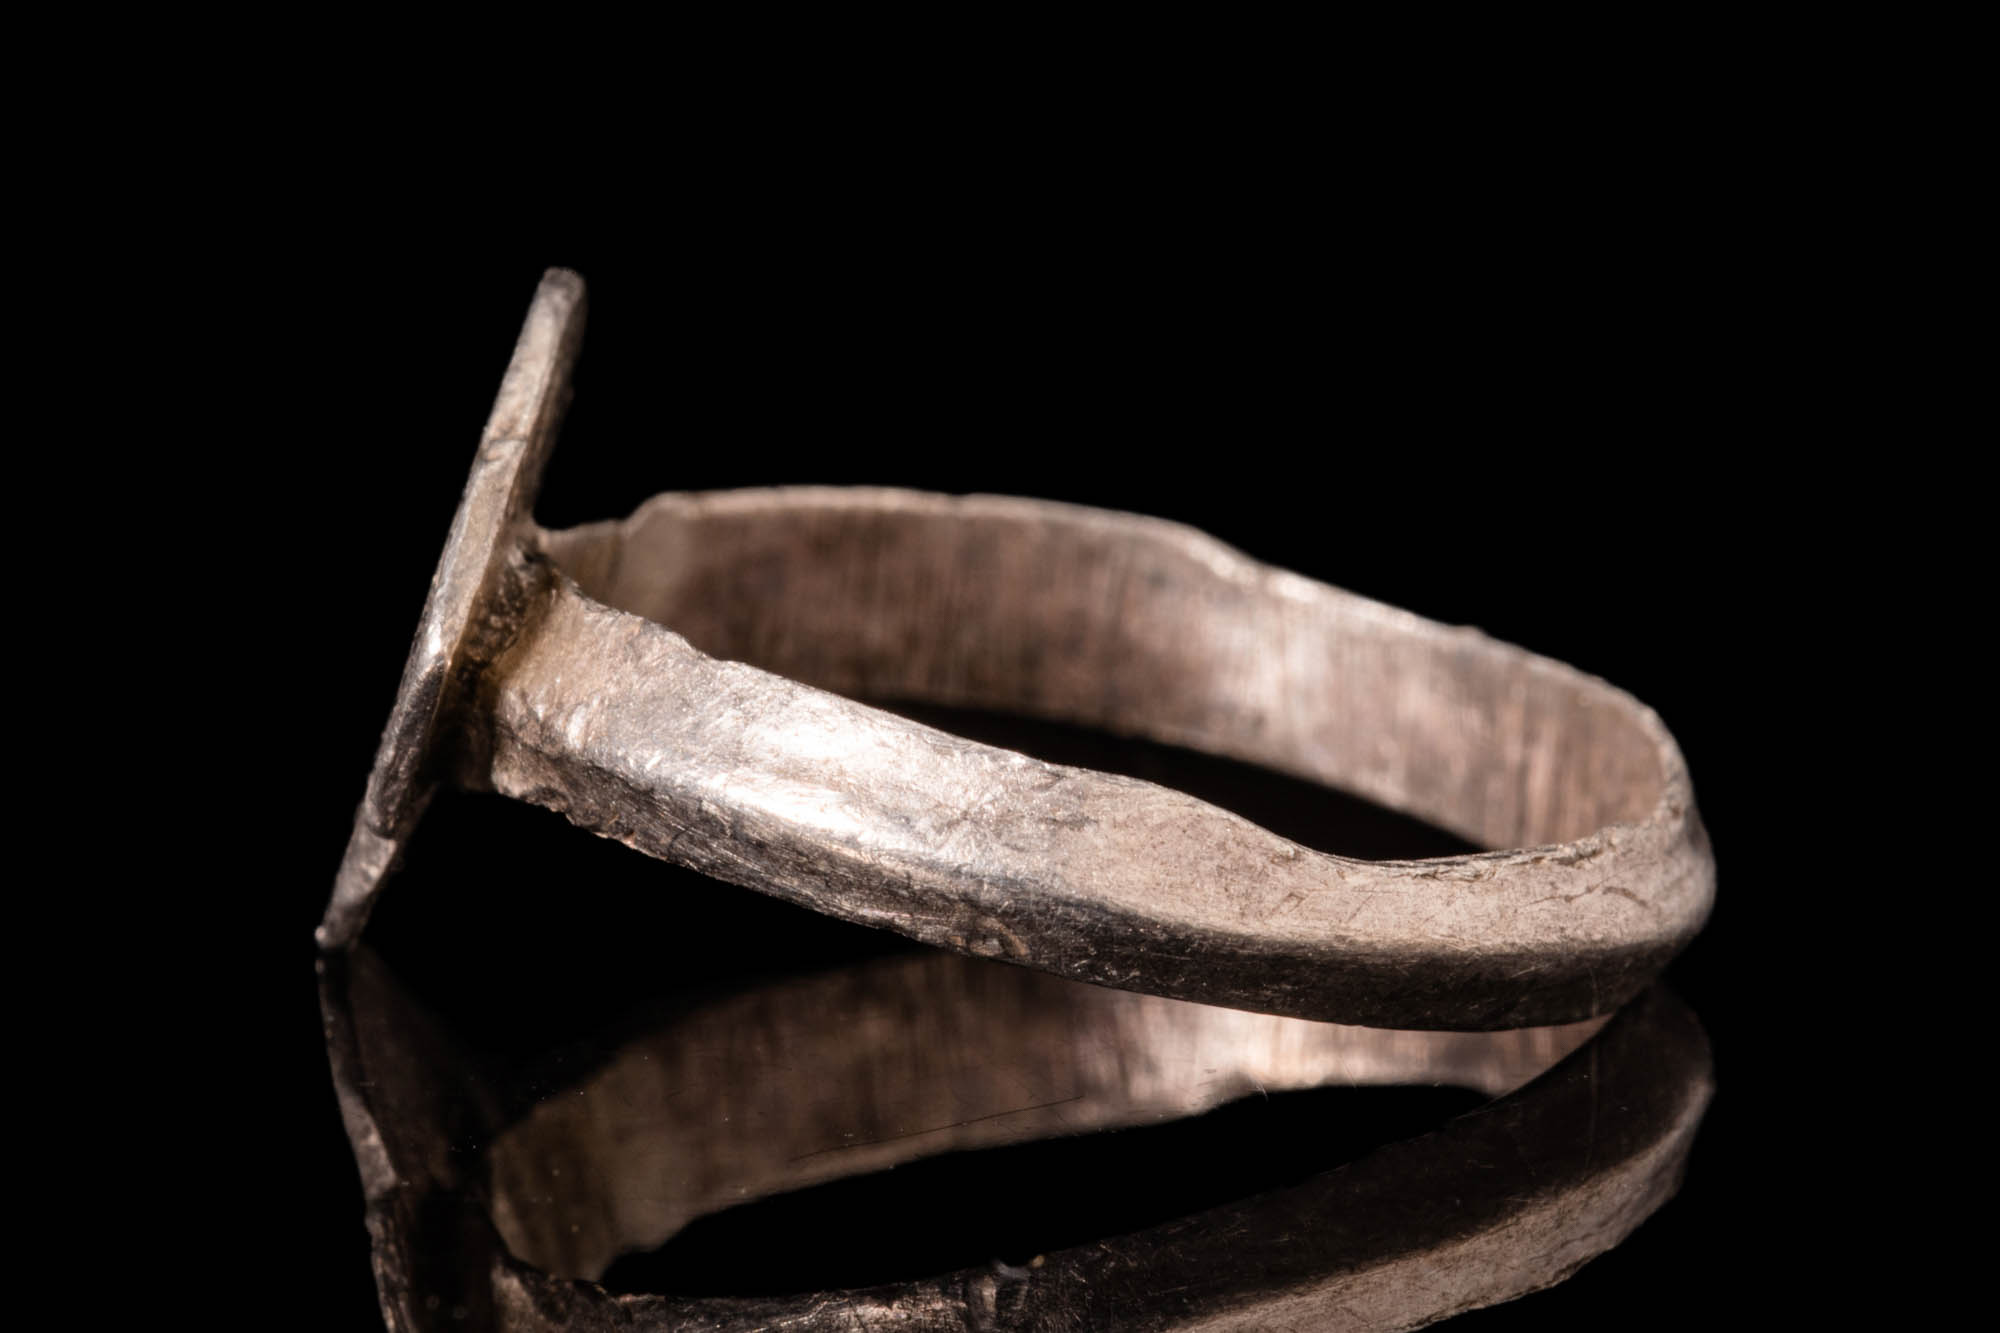 WESTERN EUROPEAN MEDIEVAL SILVER RING WITH SHIELD SHAPED BEZEL - Image 3 of 4